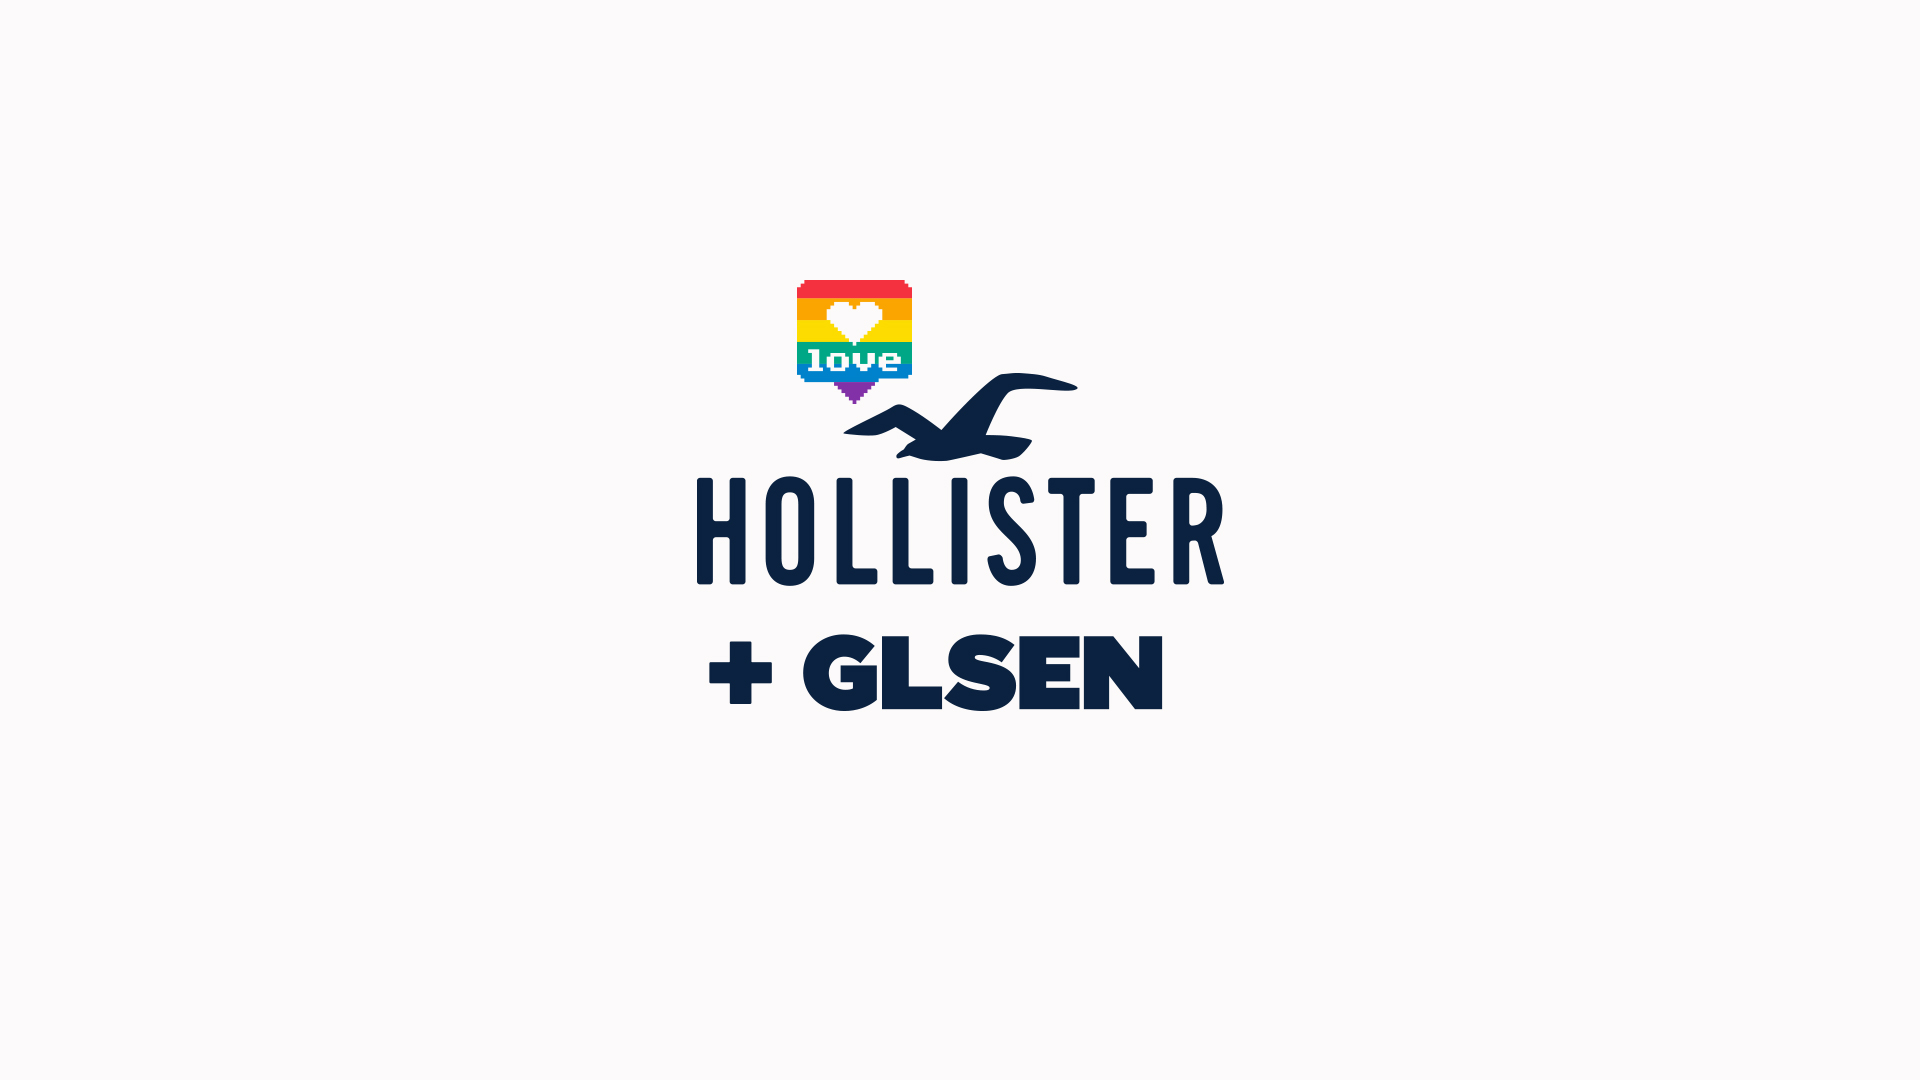 Hollister + GLSEN Pride Guide – J.THEISS